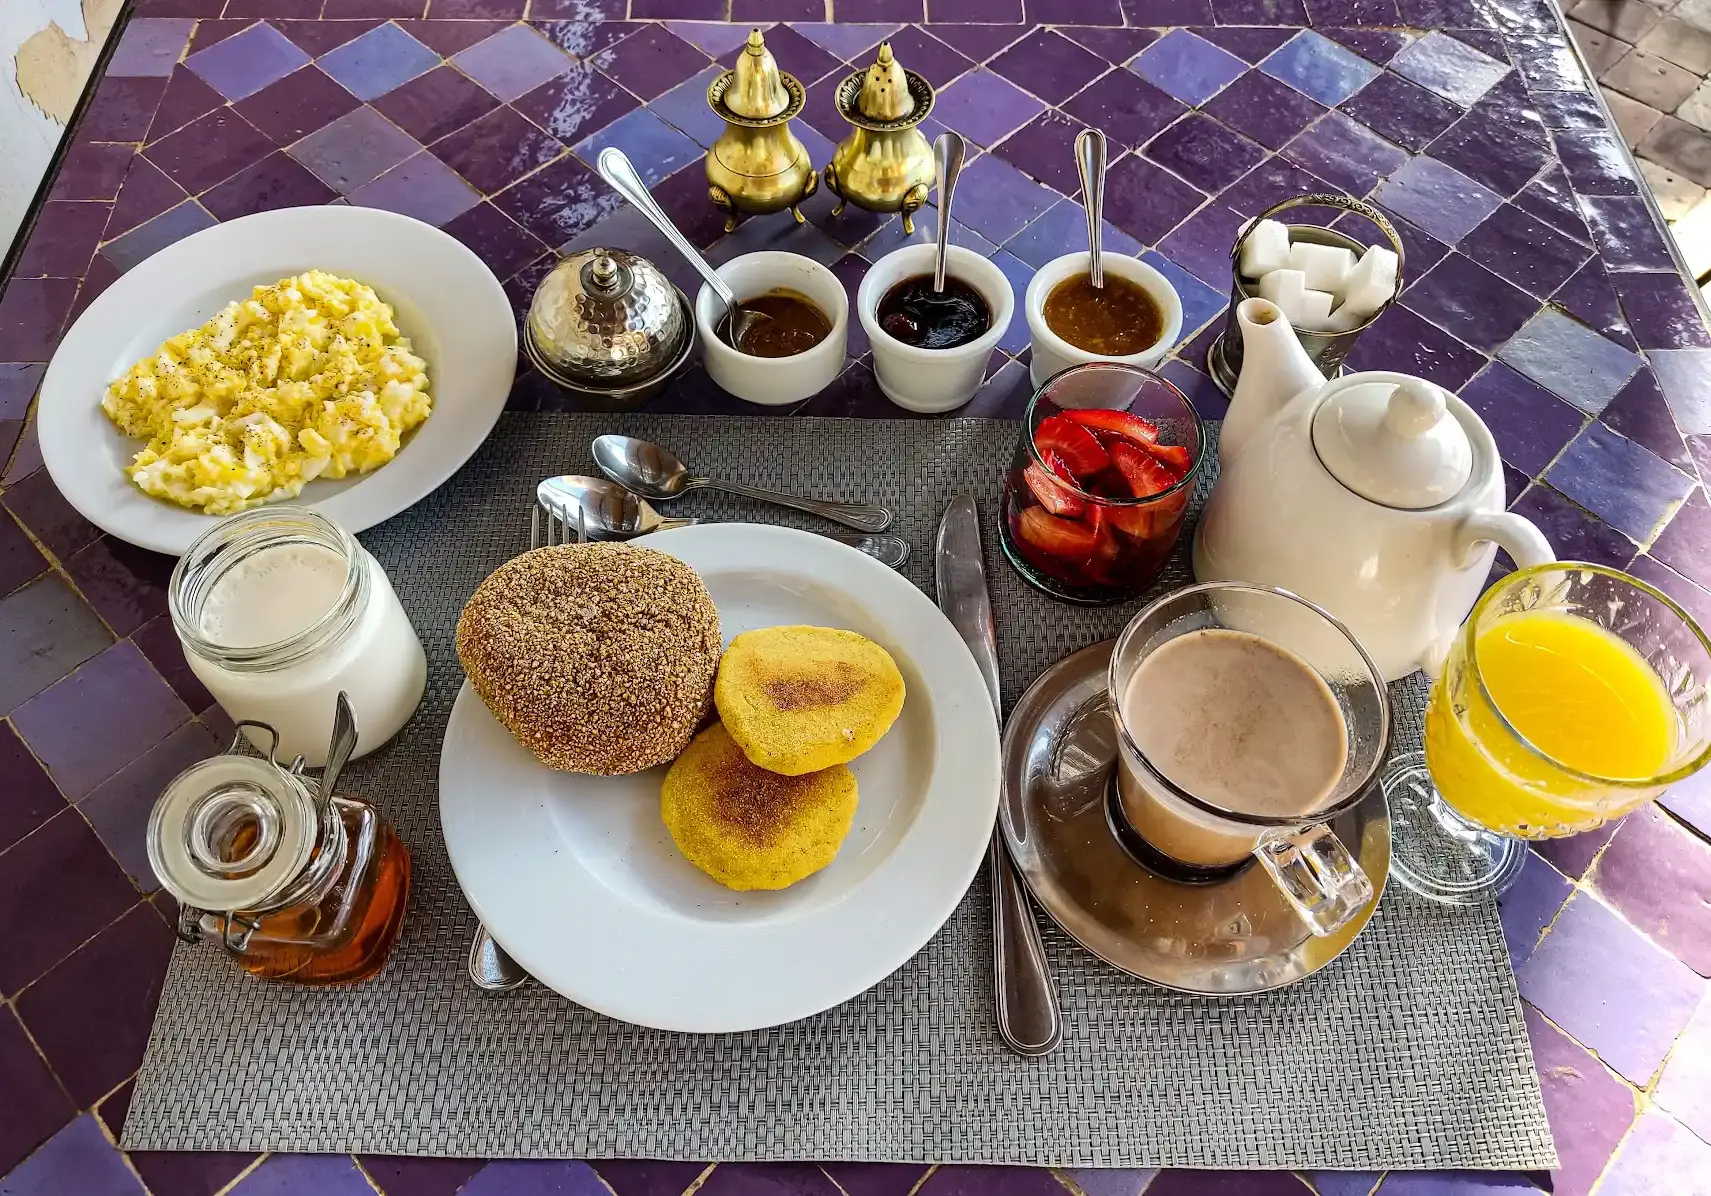 Breakfast at our riad in Marrakech